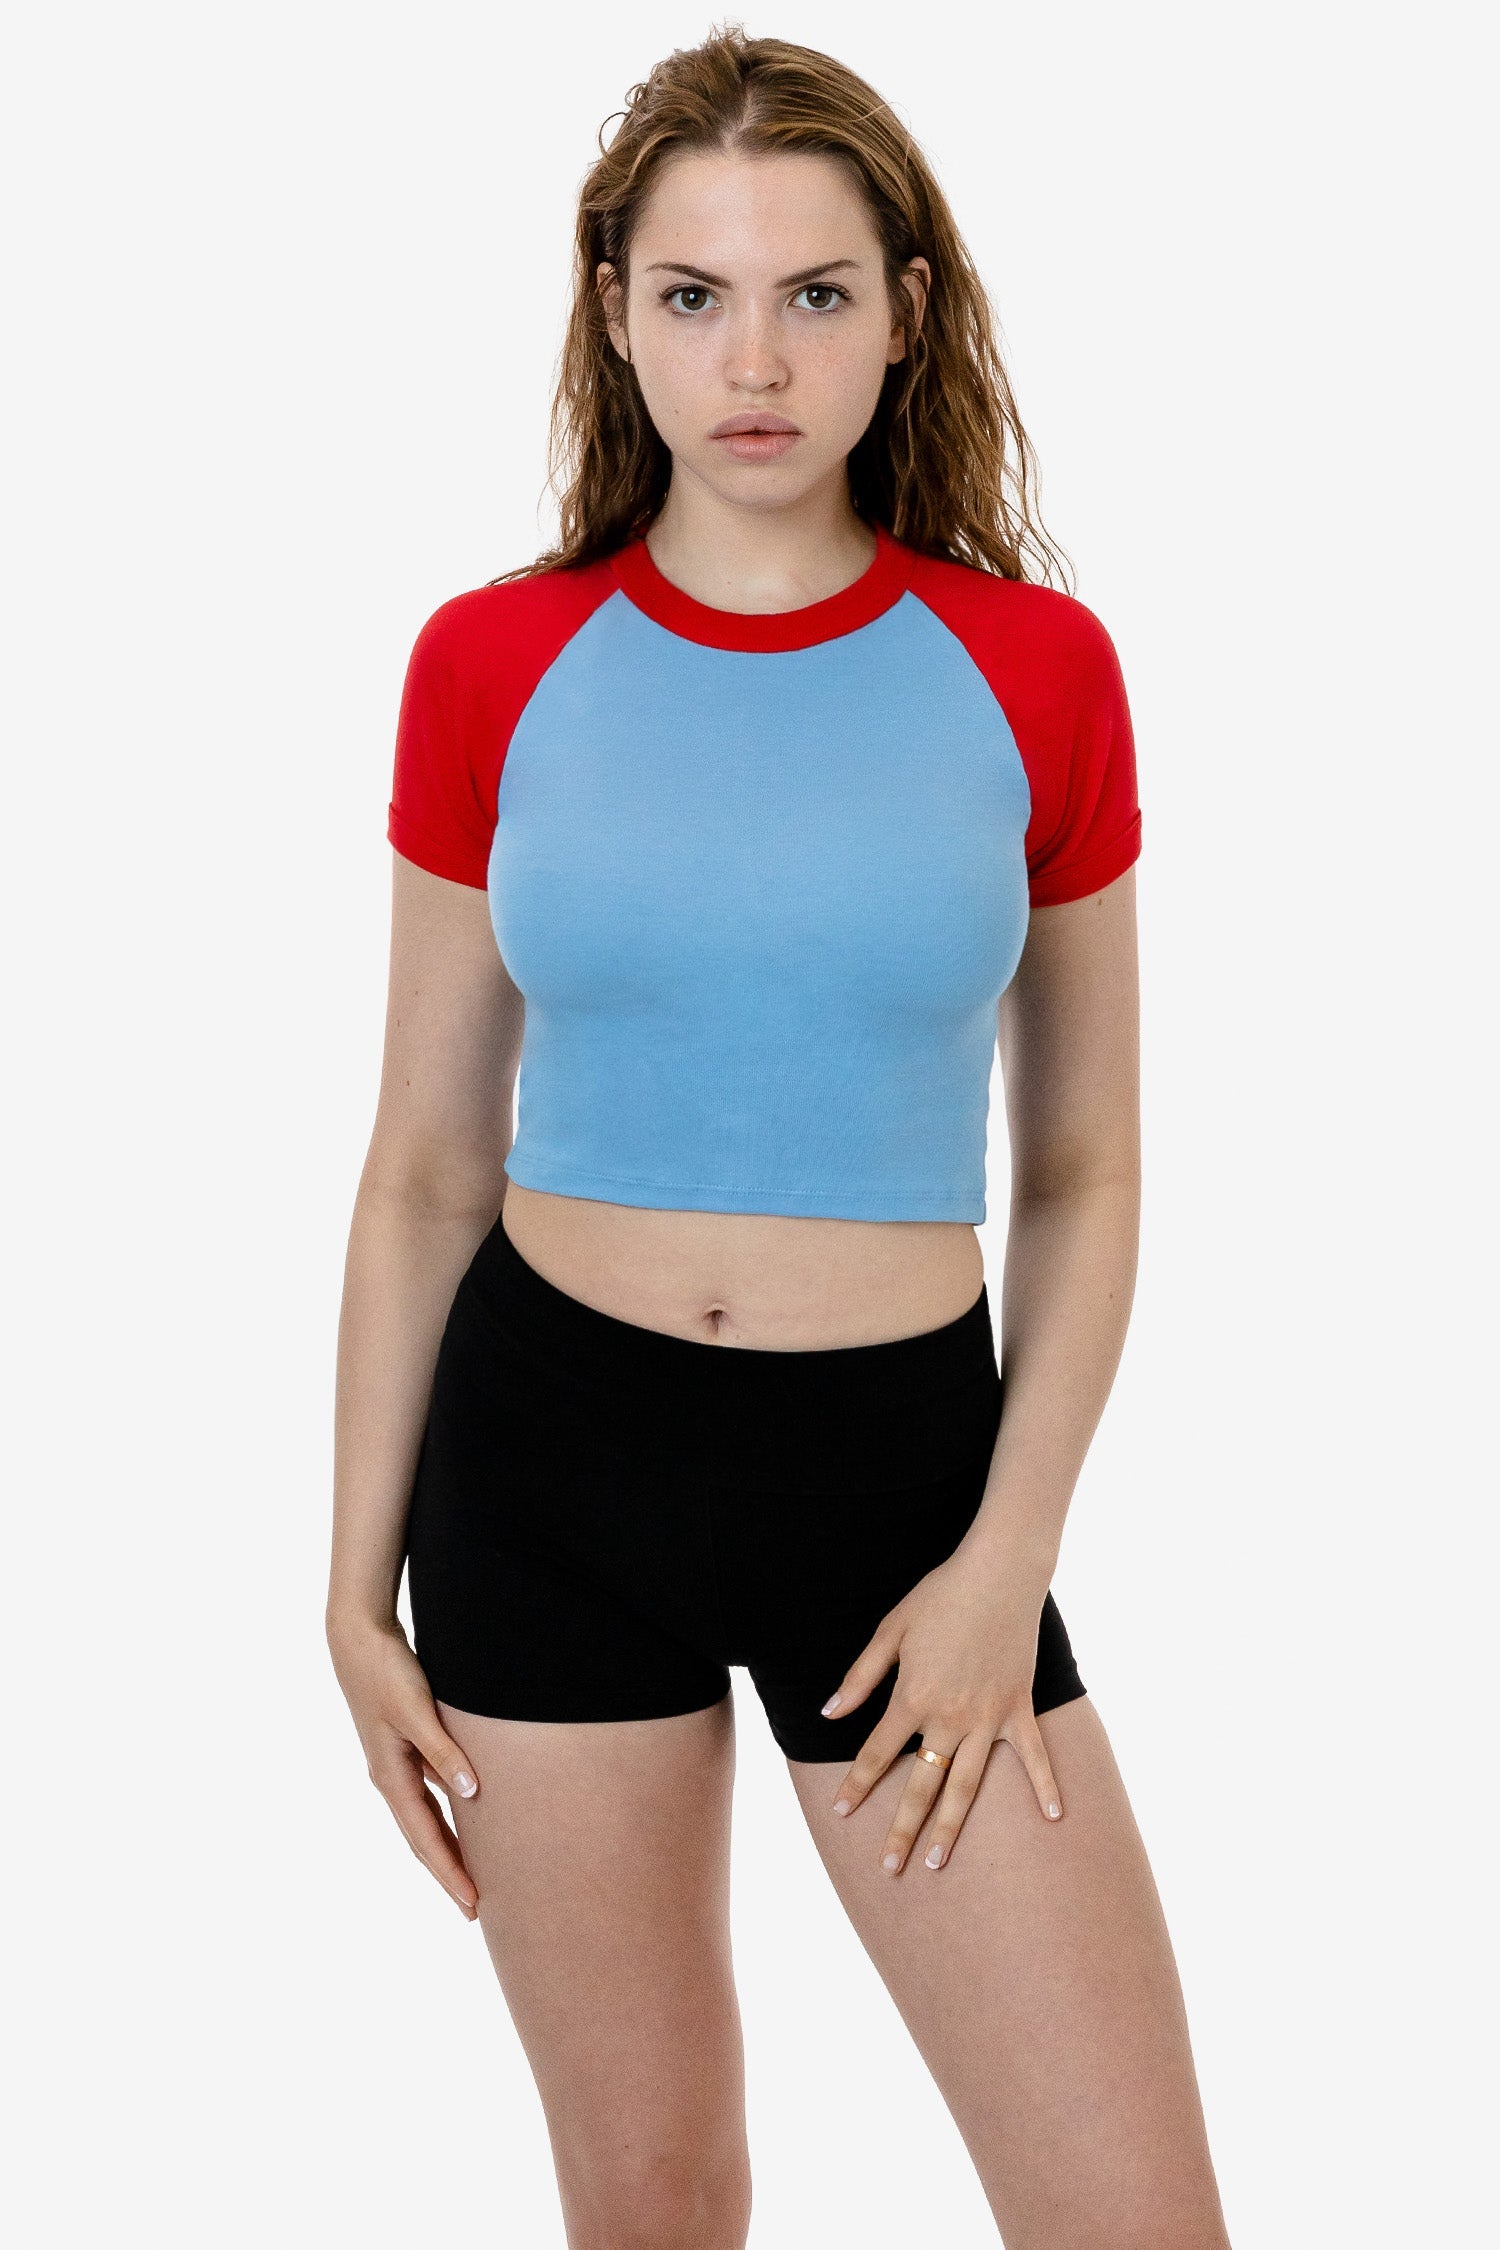 Los Angeles Apparel | Baby Rib Short Sleeve Cropped Raglan for Women in Creme/Brown, Size XS